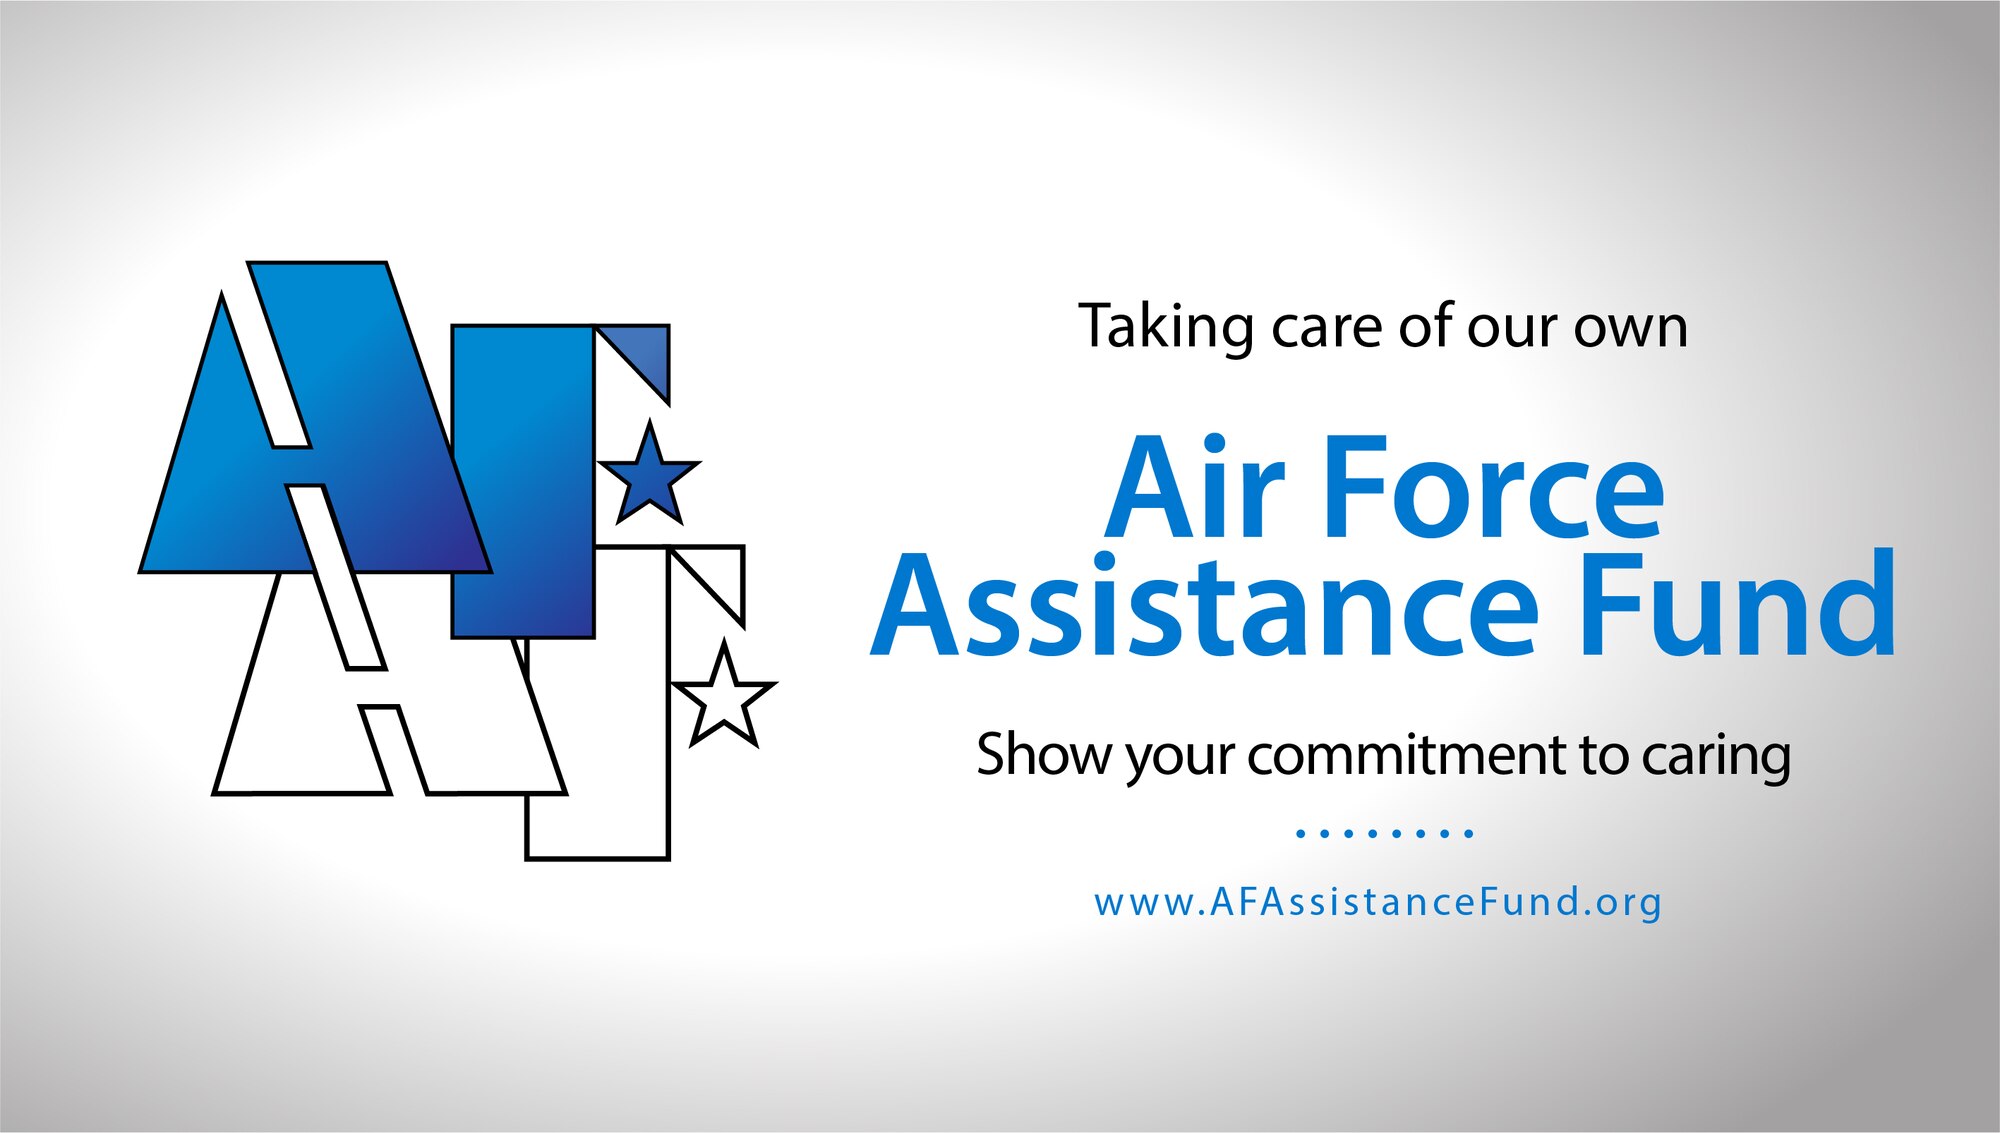 Graphic depicting the AFAF campaign and website www.AFAssistanceFund.org.